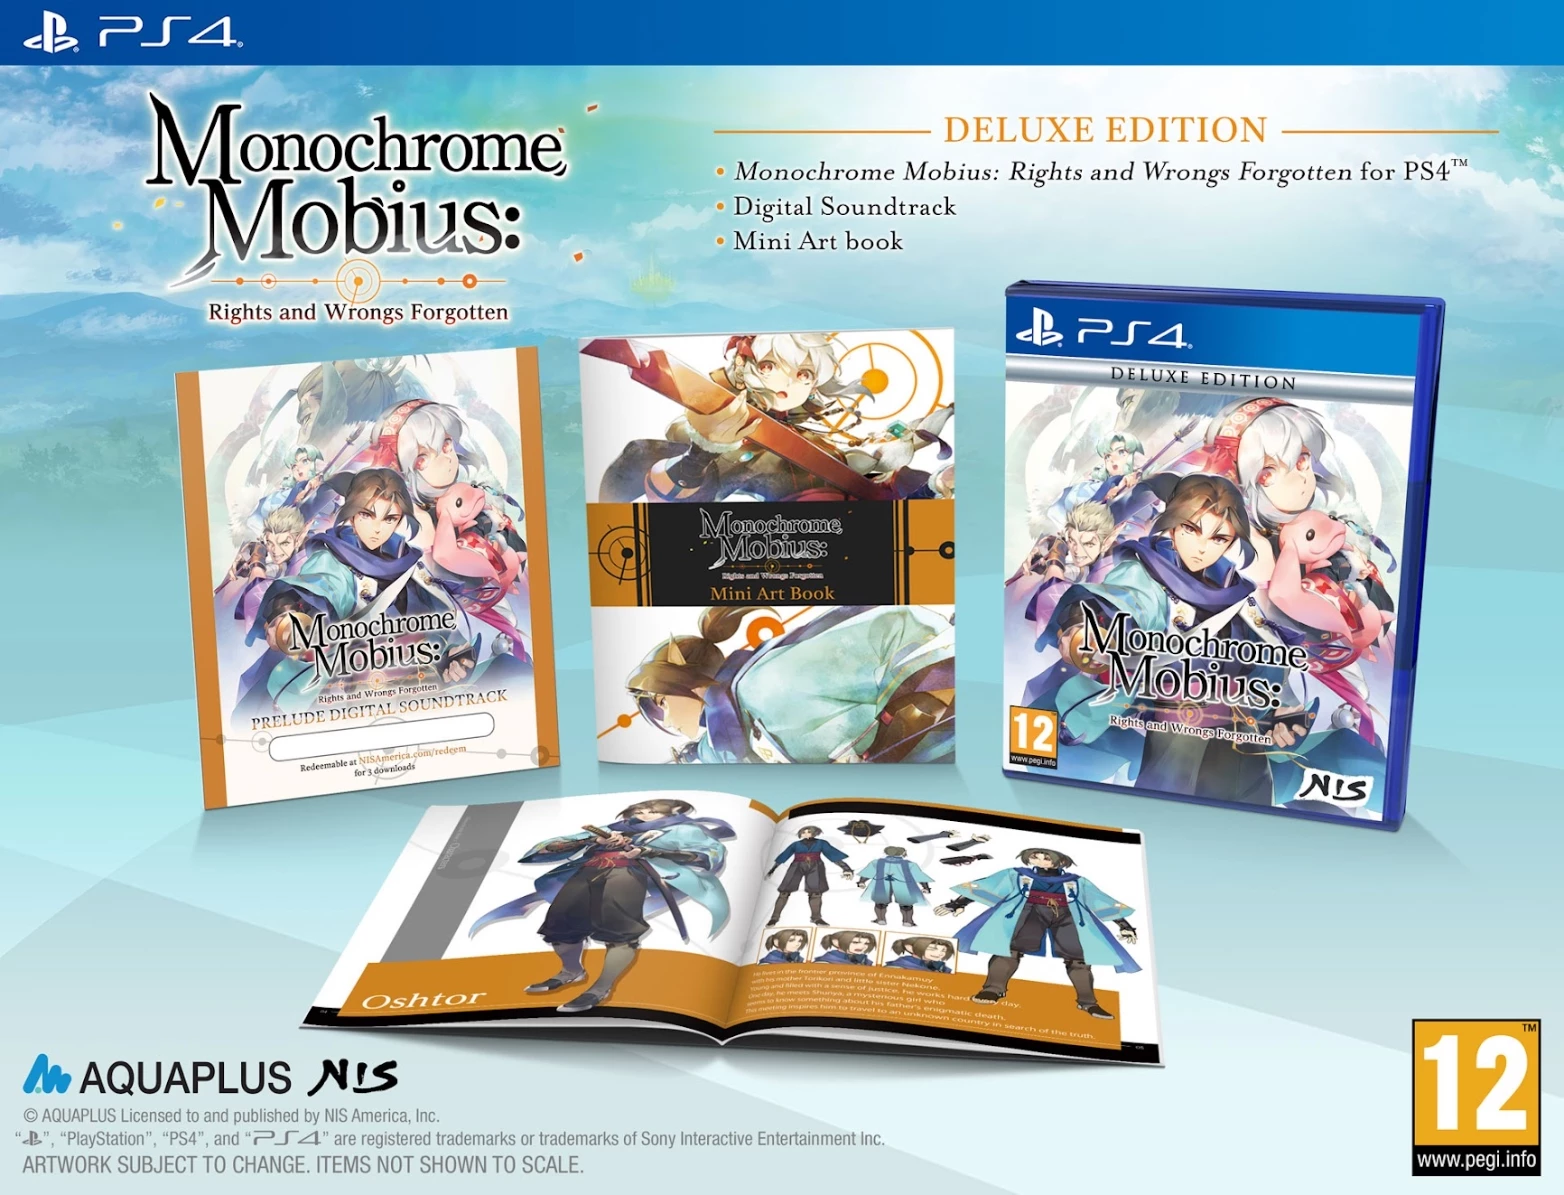 Monochrome Mobius: Rights and Wrongs Forgotten - Deluxe Edition (PS4), NIS America